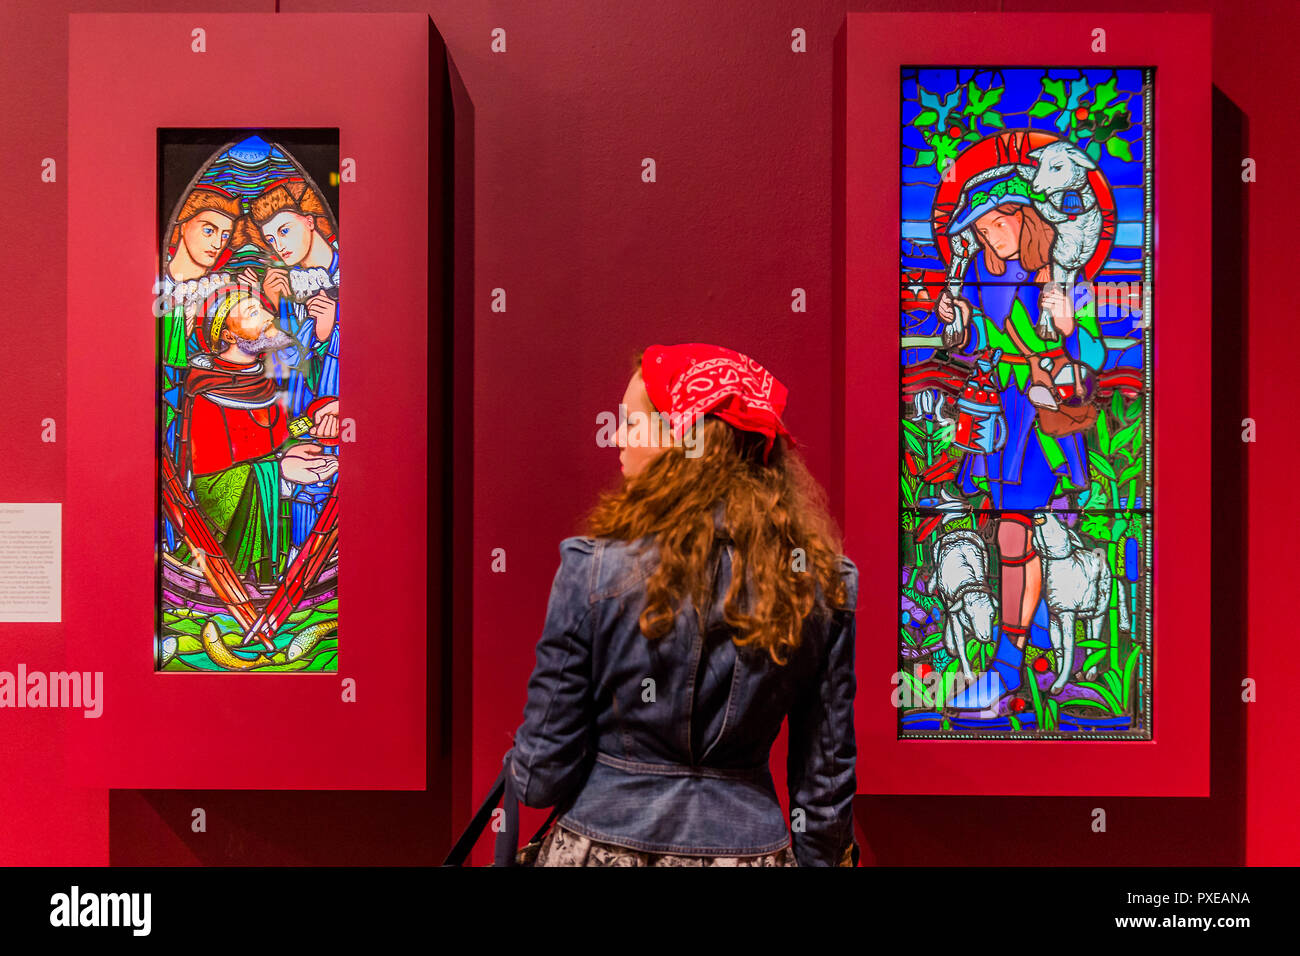 London, UK. 22nd Oct, 2018. The Calling of St Peter and the Good Shepherd - A retrospective of Pre-Raphaelite painter Edward Burne-Jones at the Tate Britain. Renowned for otherworldly depictions of beauty inspired by myth, legend and the Bible, Burne-Jones was a pioneer of the symbolist movement and the only Pre-Raphaelite to achieve world-wide recognition in his lifetime. The exhibition brings together 150 works across painting, stained glass and tapestry. It runs from 24 Oct 18 - 24 Feb 19. Credit: Guy Bell/Alamy Live News Stock Photo